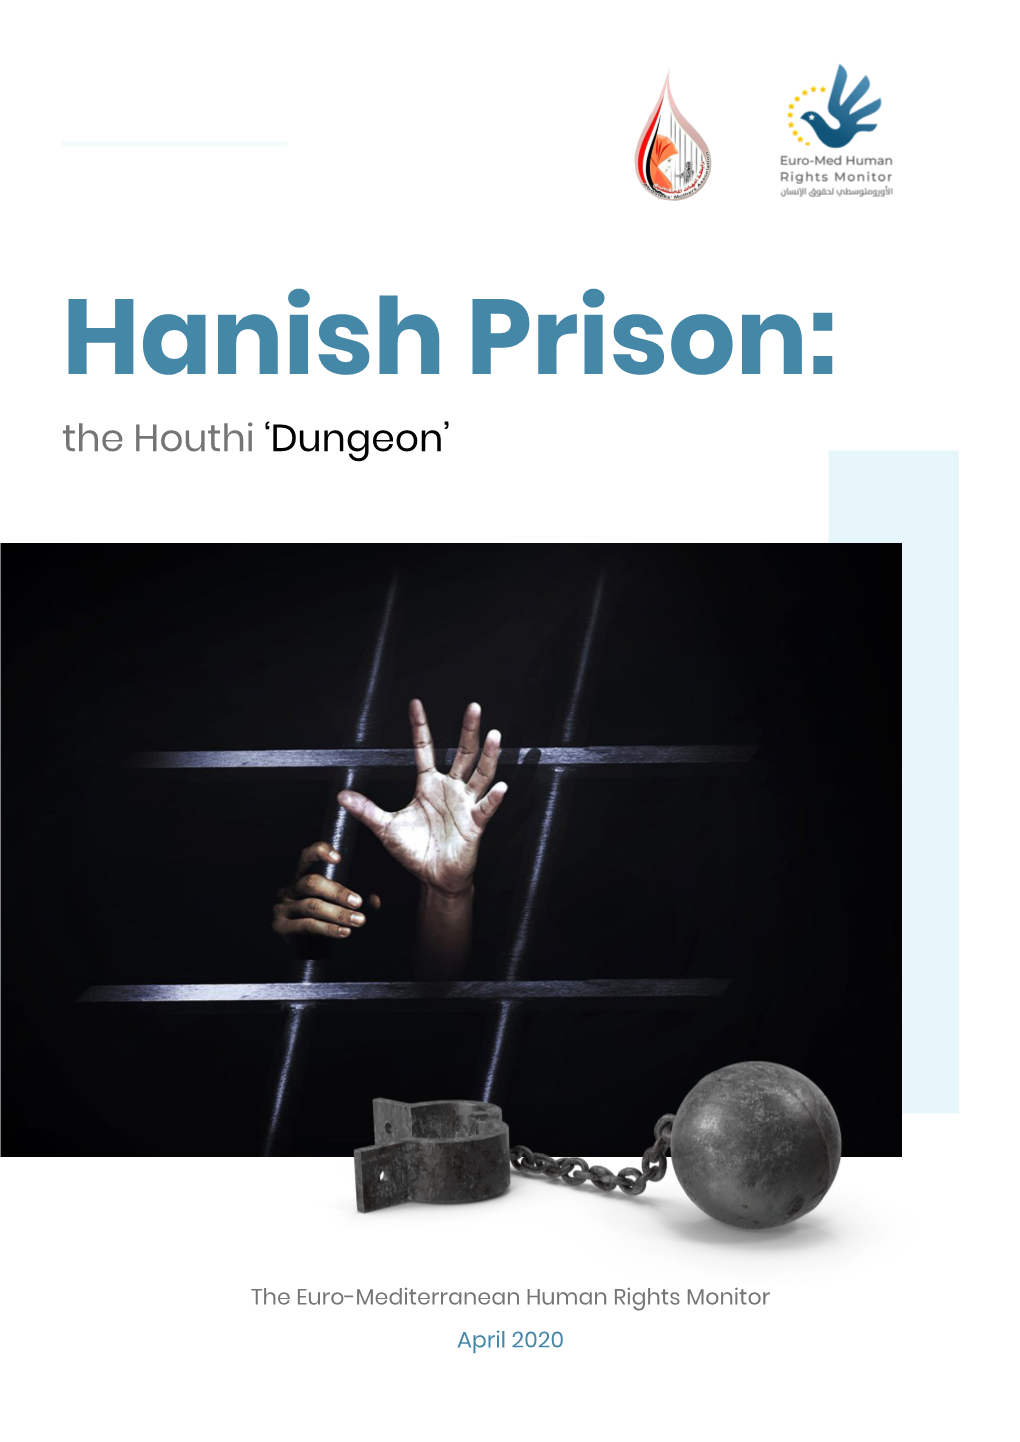 Hanish Prison: the Houthi ‘Dungeon’